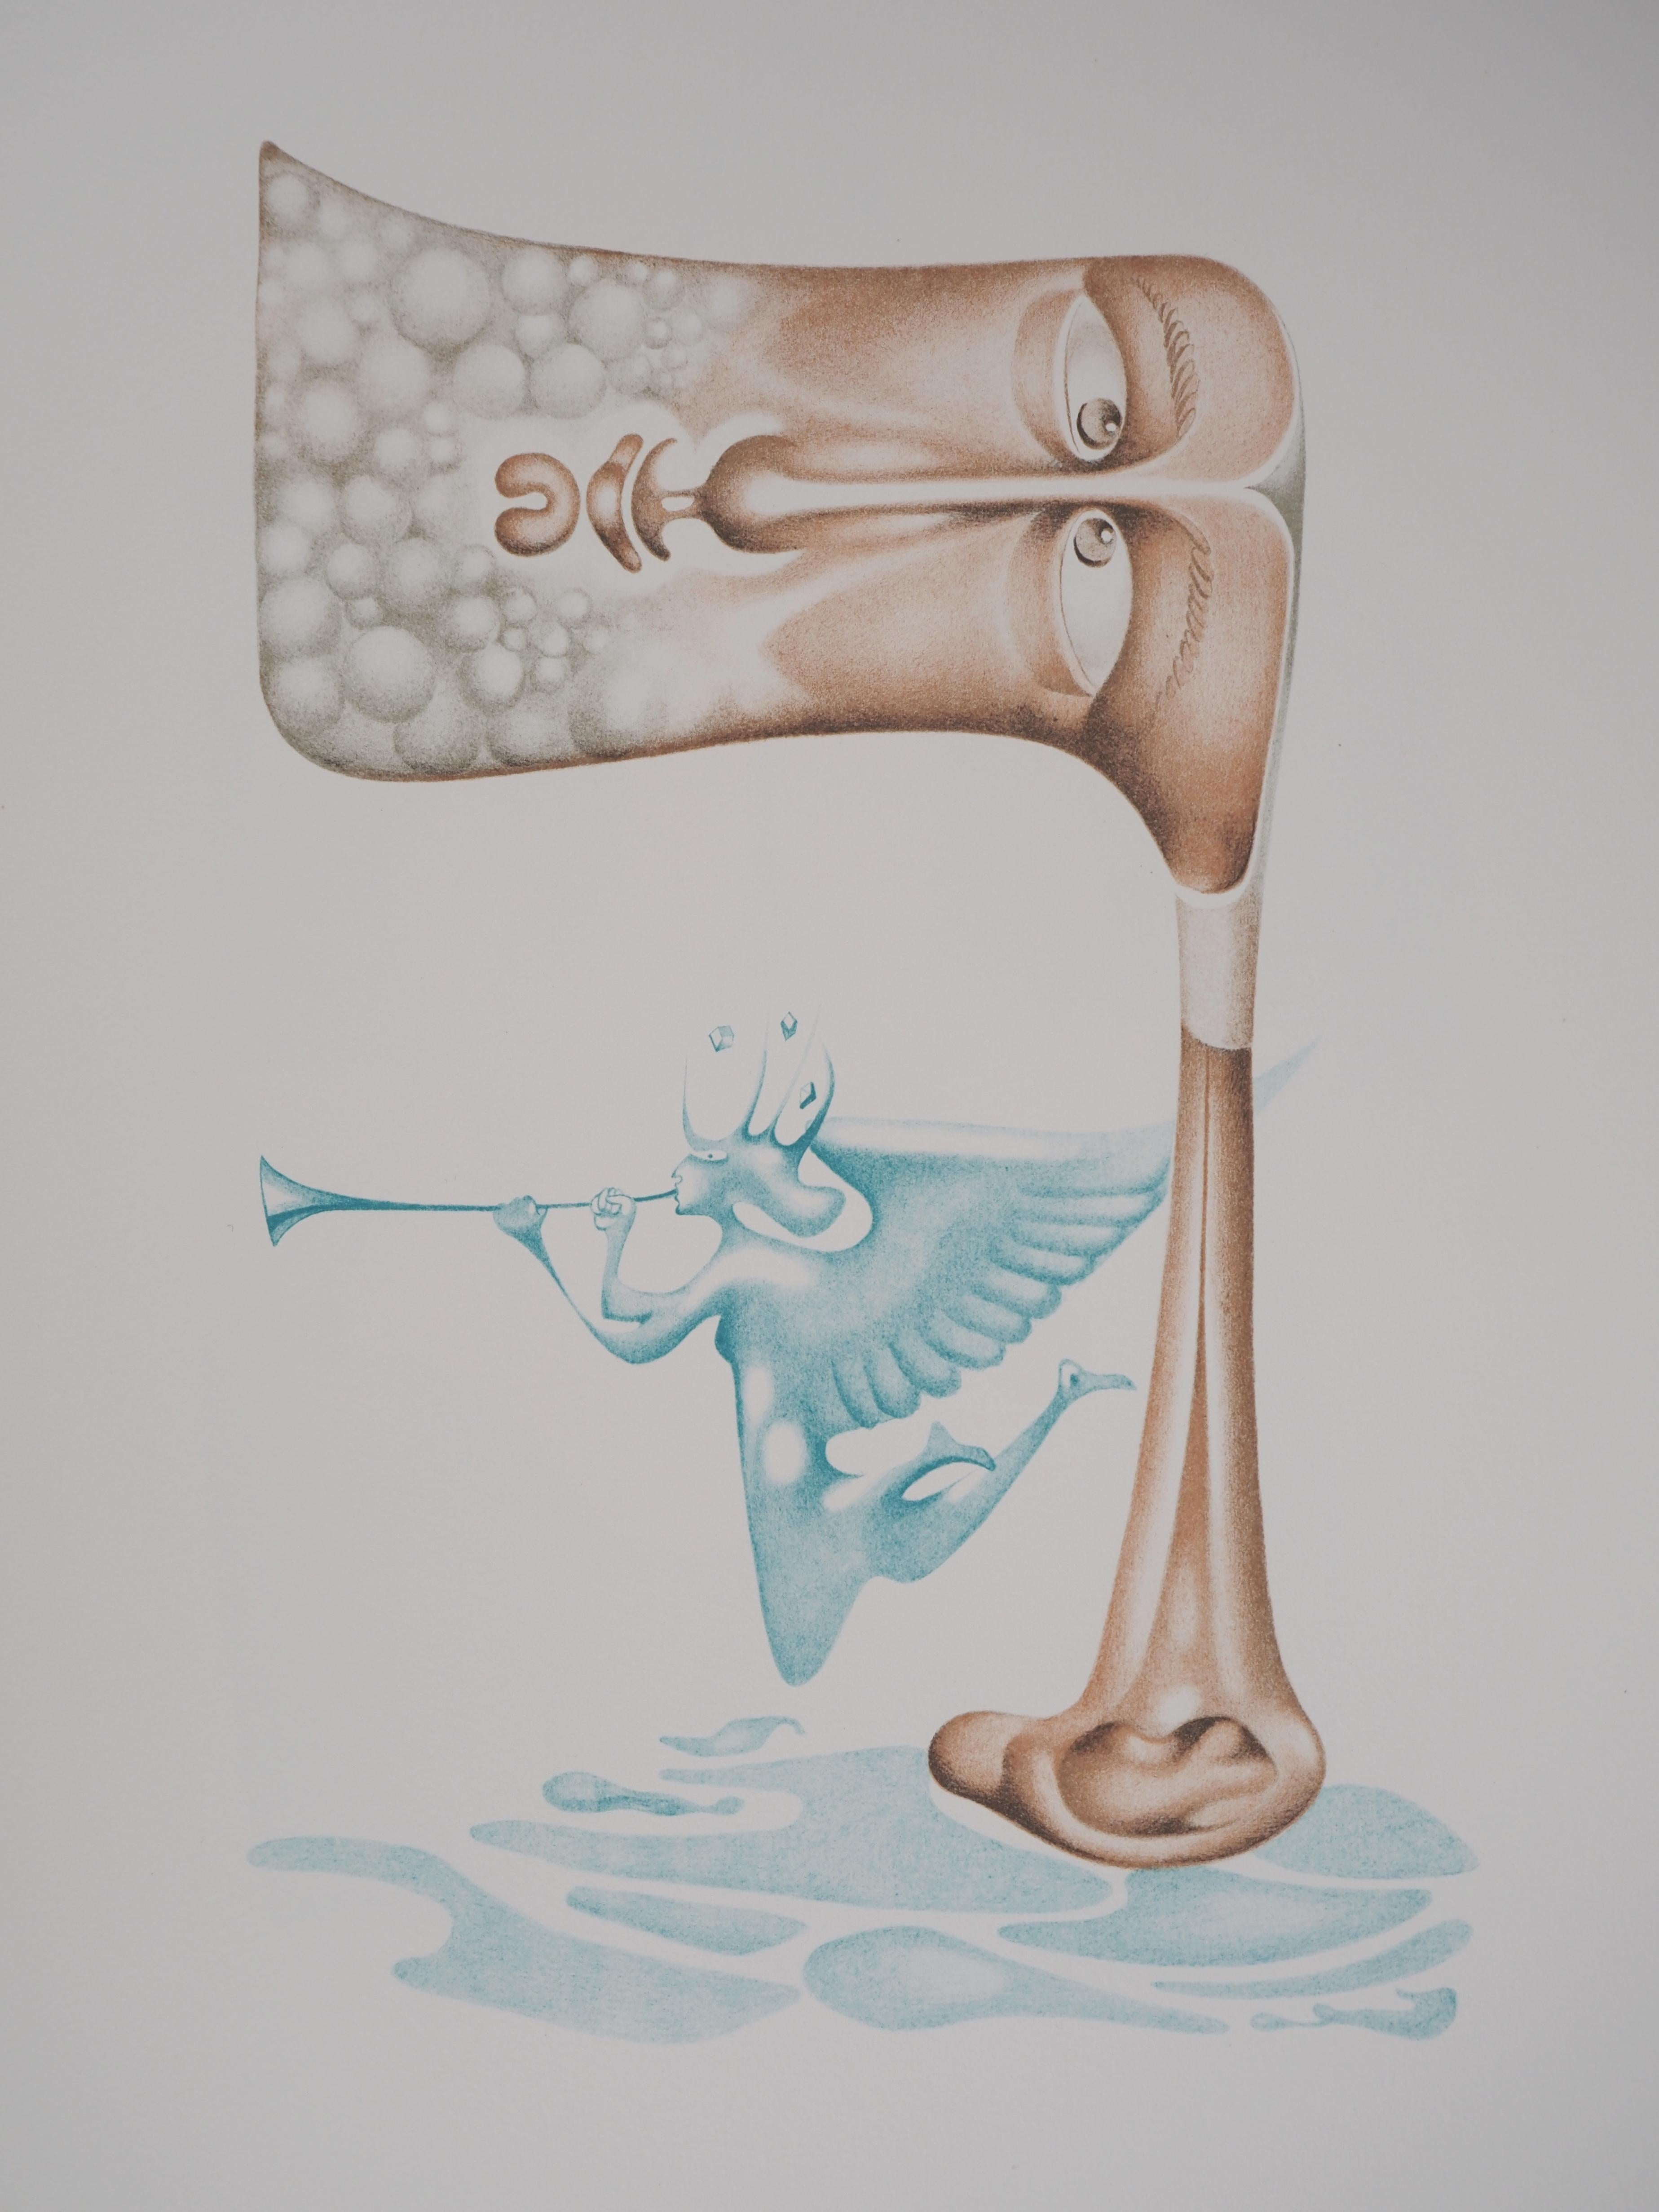 Listen to the Celestial Trumpets - Original lithograph, Signed - Surrealist Print by Jules PERAHIM